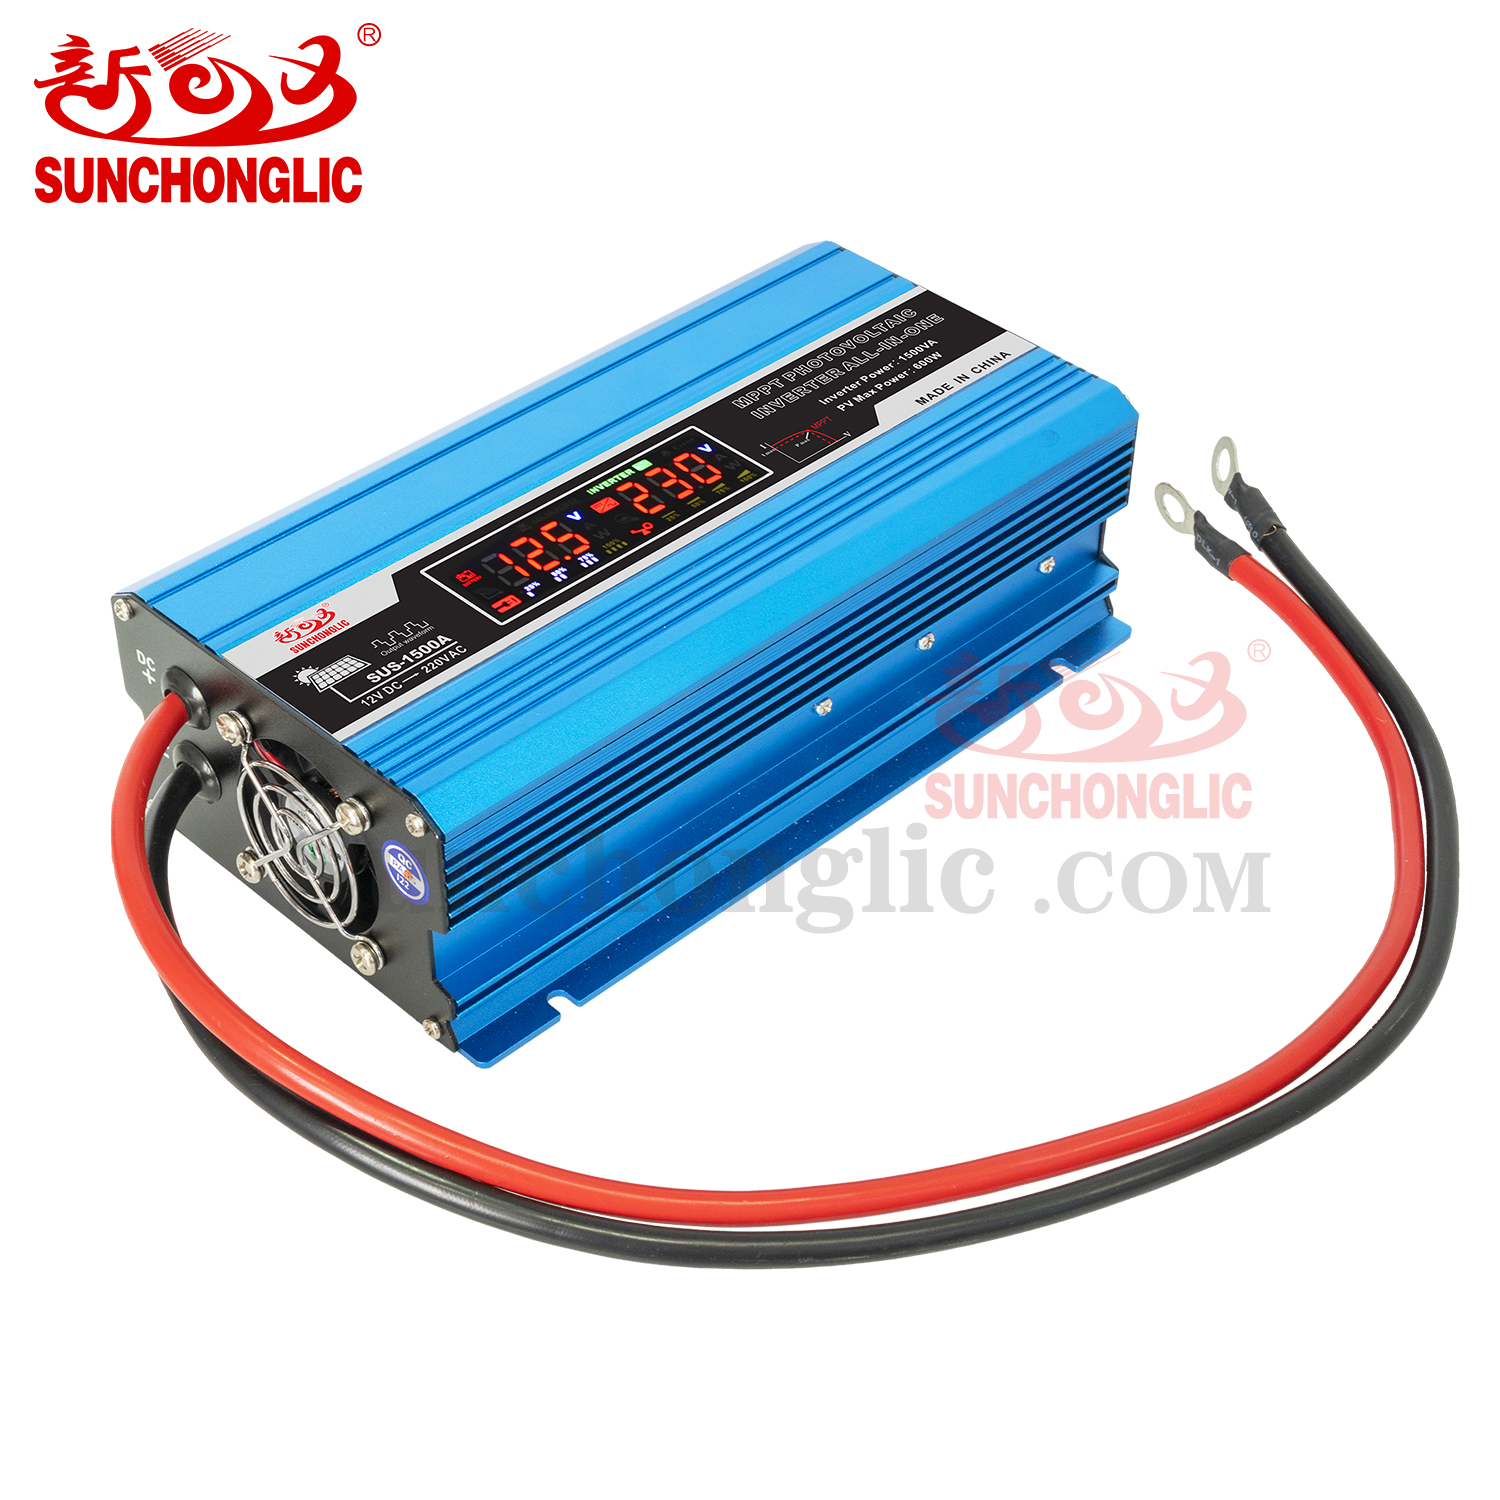 Solar Charge Inverter - SUS-1500A